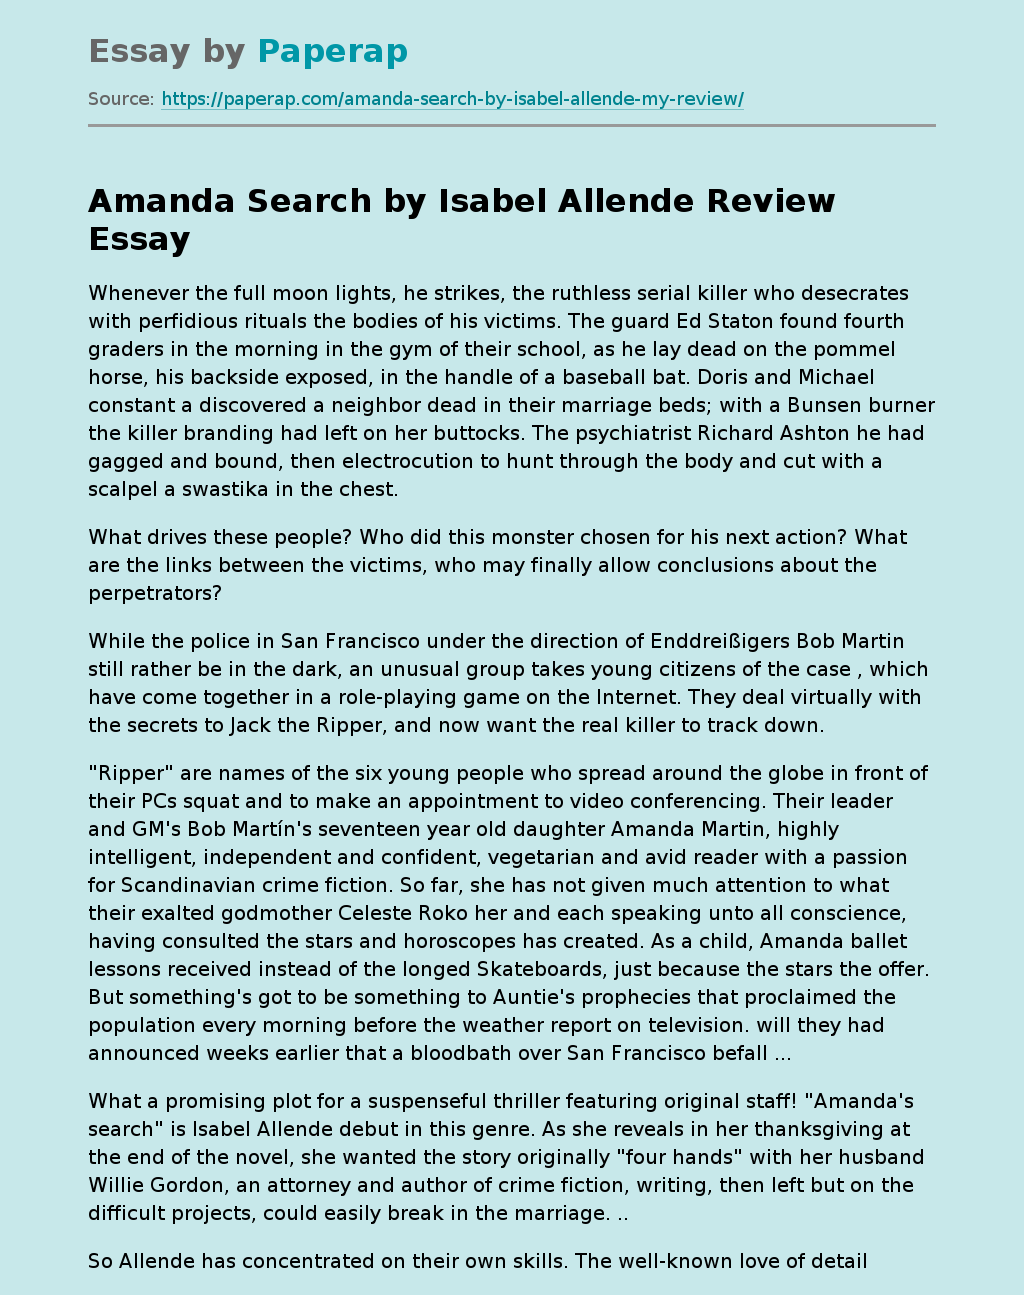 "Amanda Search" by Isabel Allende